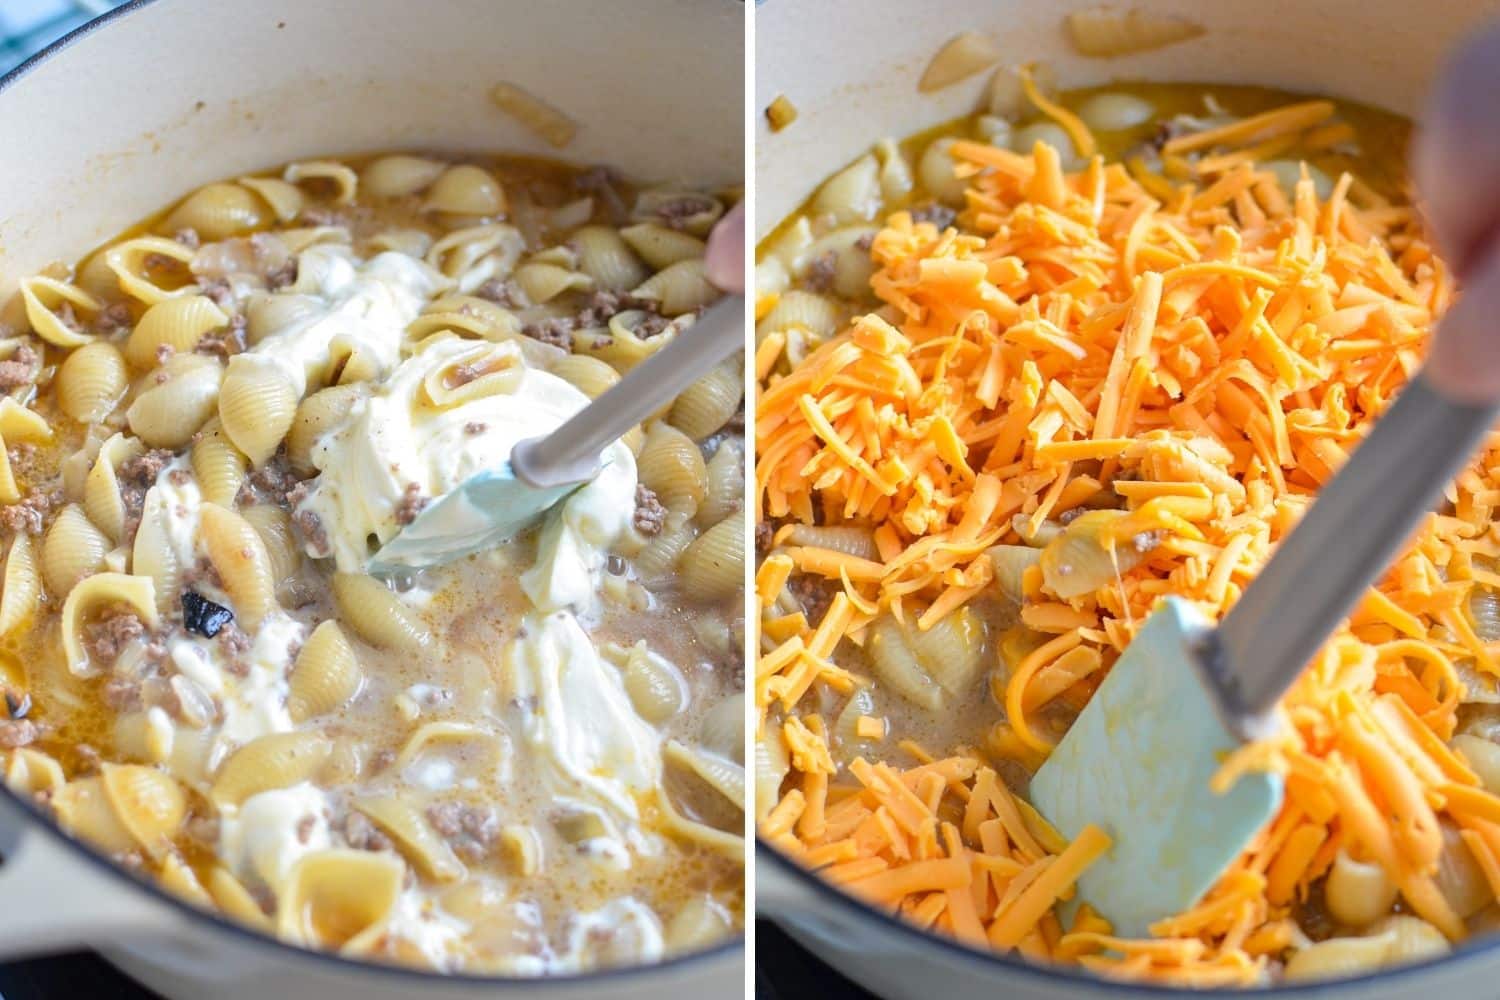 Adding in sour cream and cheese to a dutch oven meal.